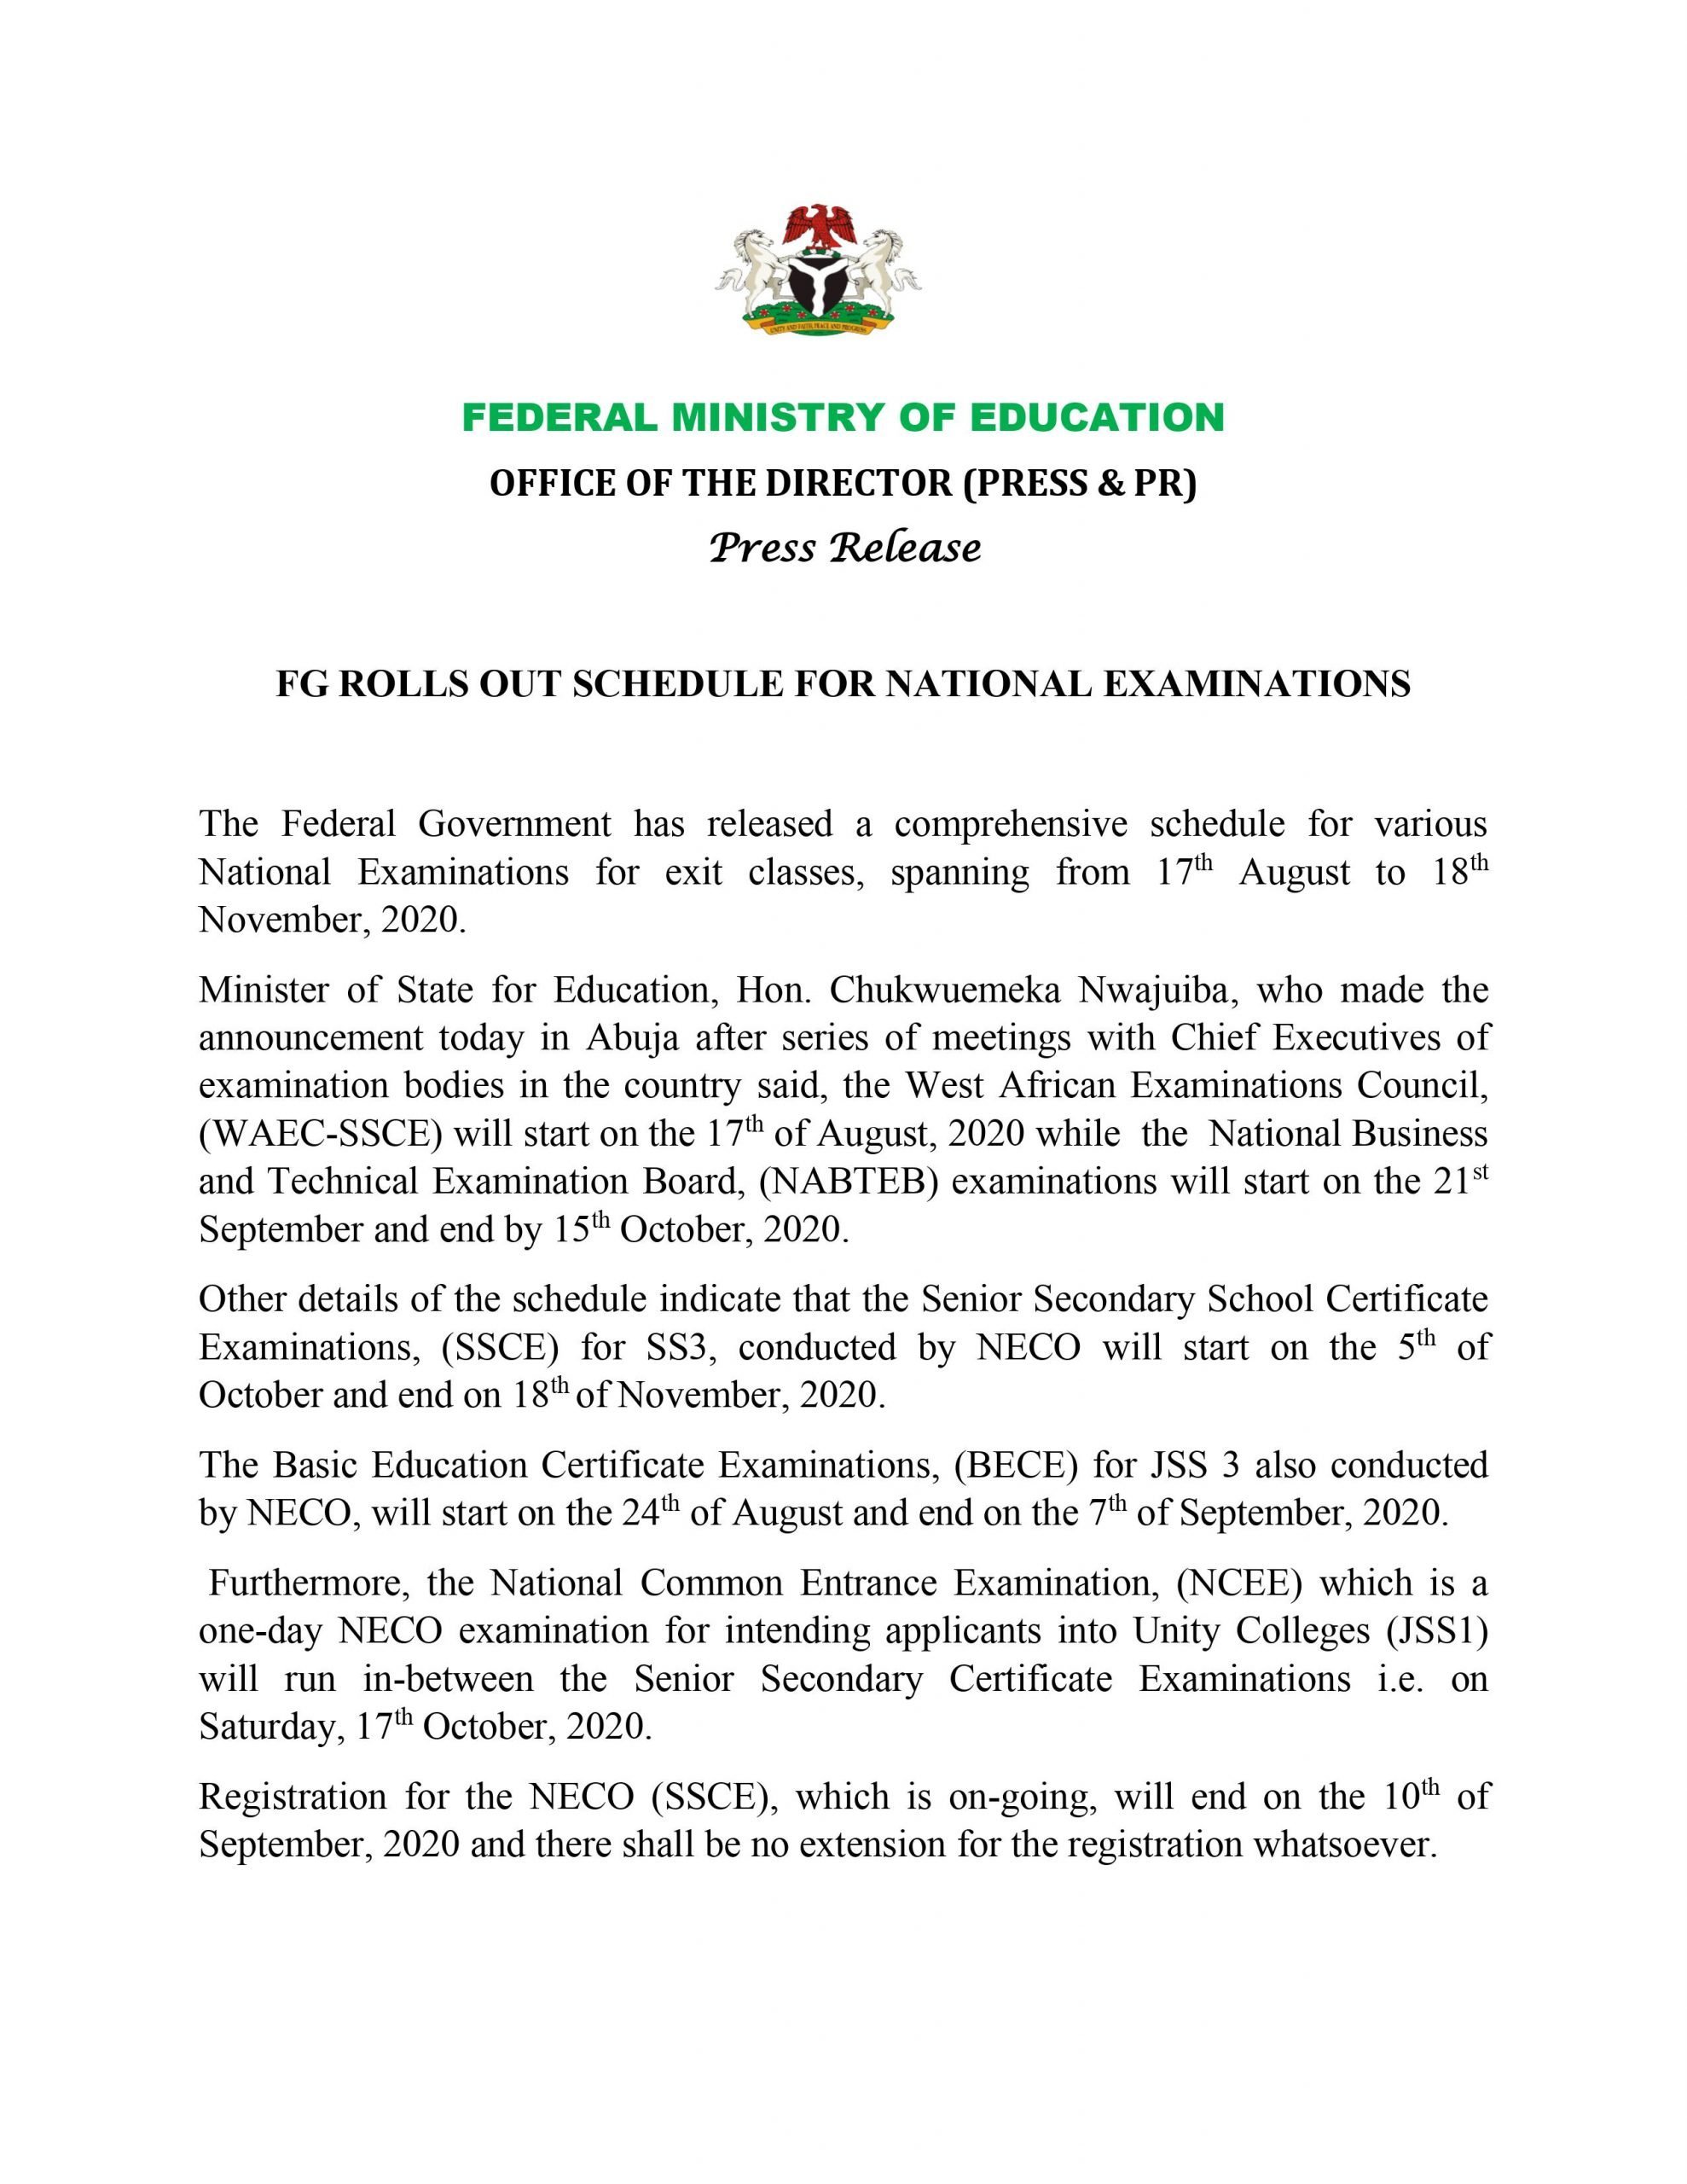 FG Announces Commencement Dates for NECO, NABTEB, Other Examinations 